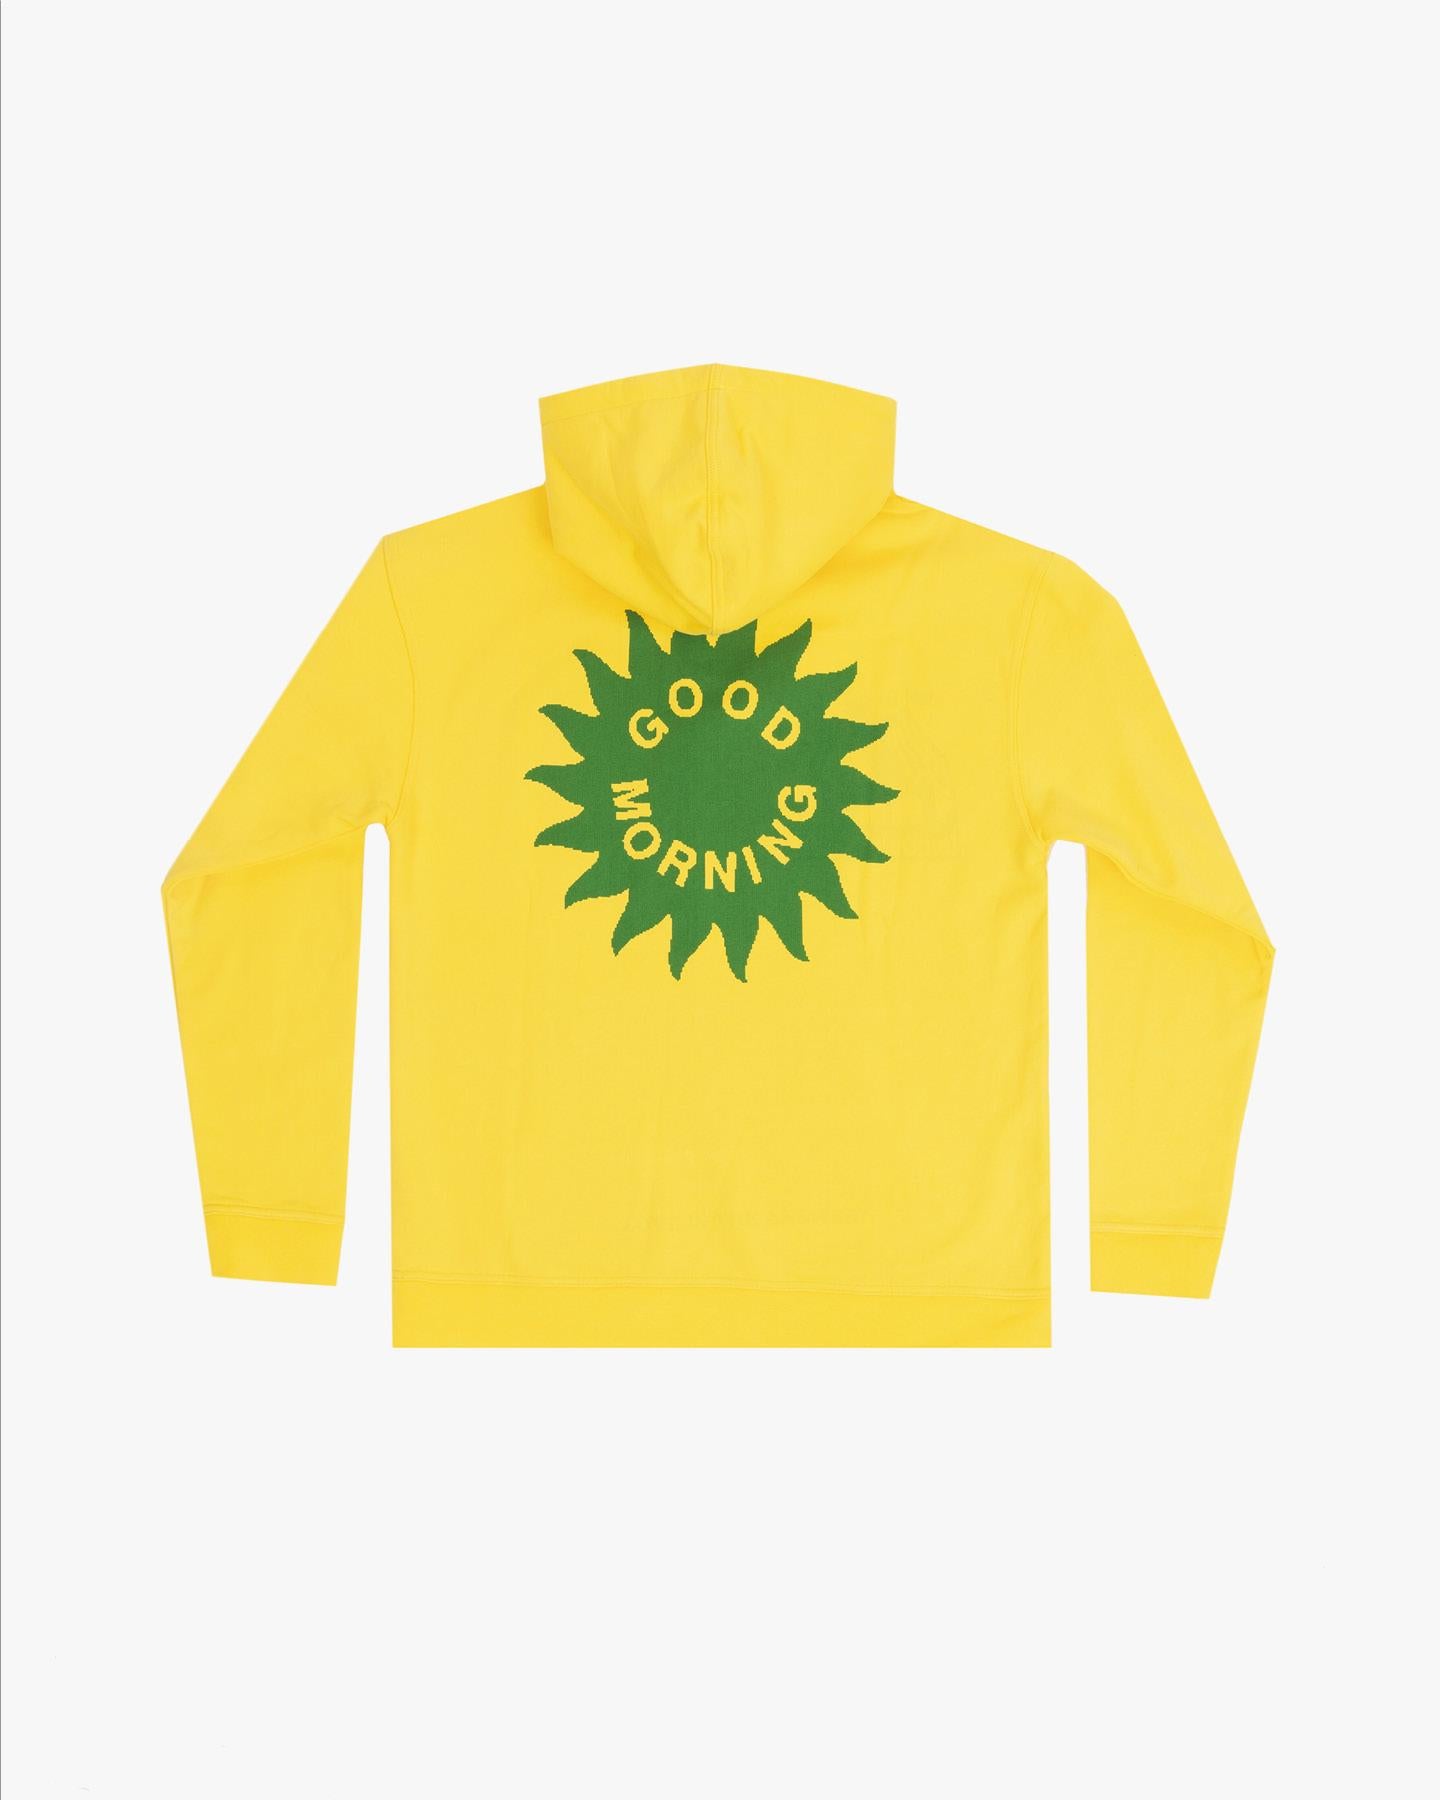 GOOD MORNING TAPES - All Welcome Home Fleece Hoodie Yellow